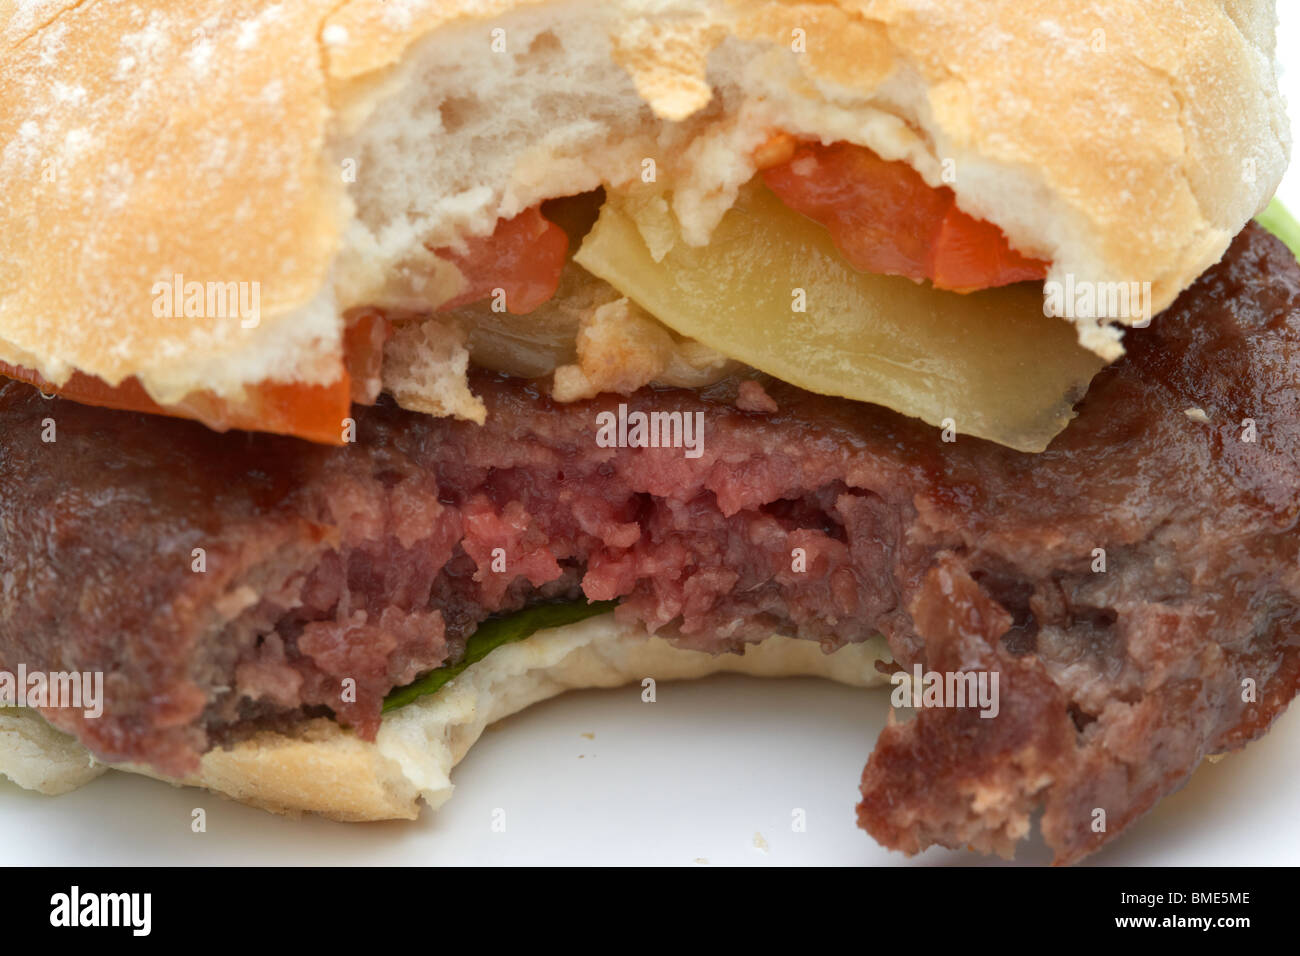 bite taken out of partially cooked home made hamburger showing raw meat Stock Photo